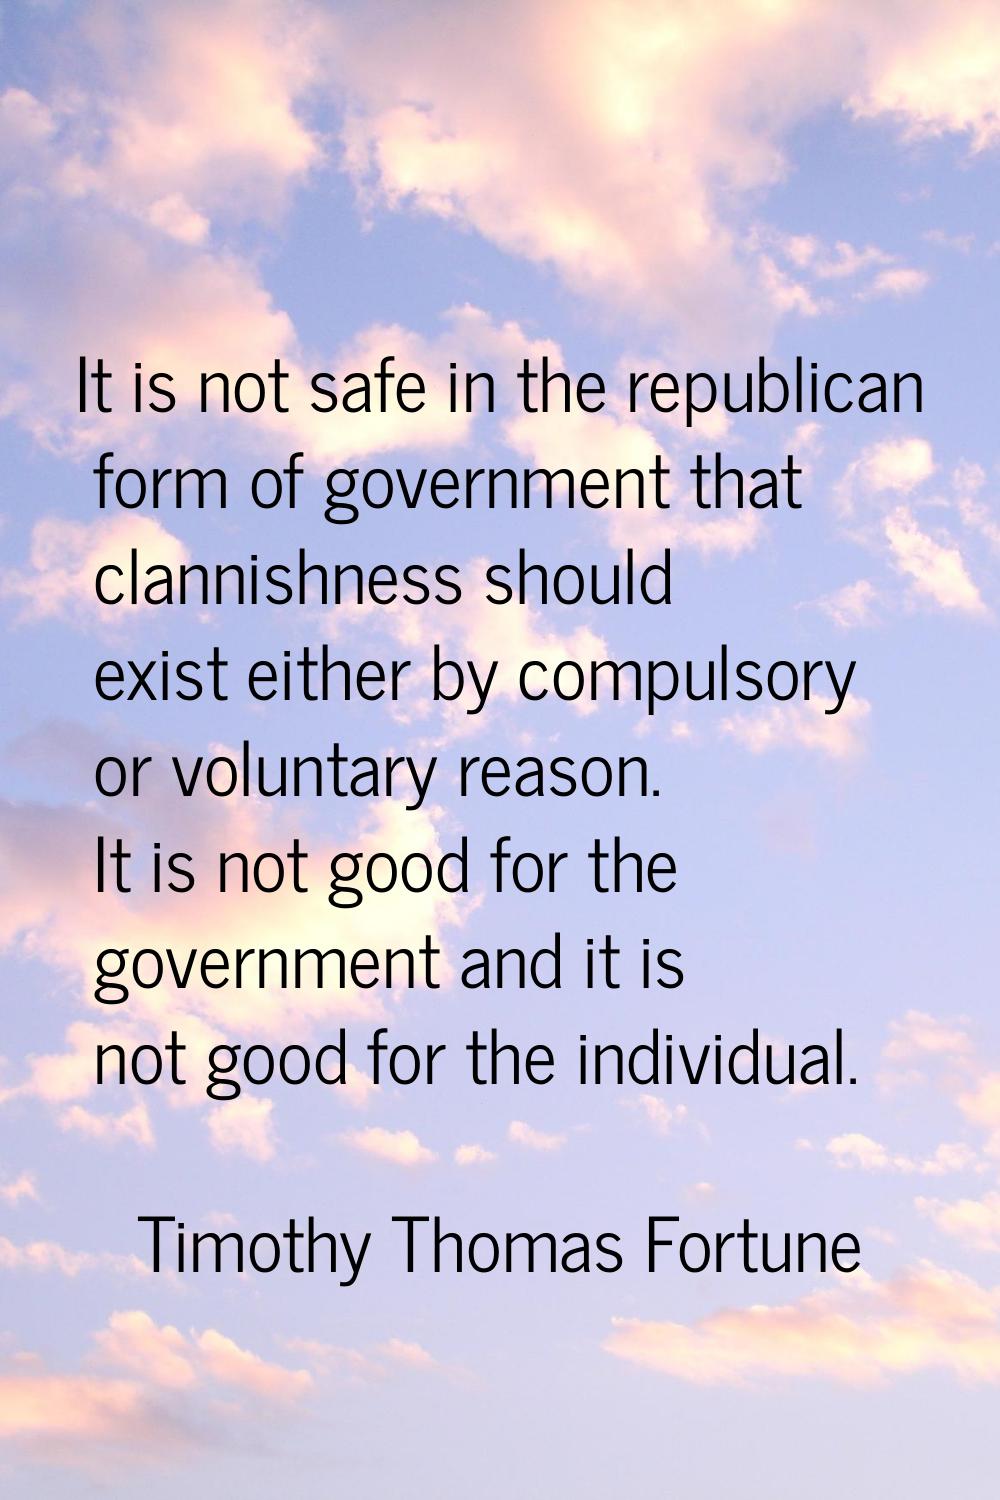 It is not safe in the republican form of government that clannishness should exist either by compul